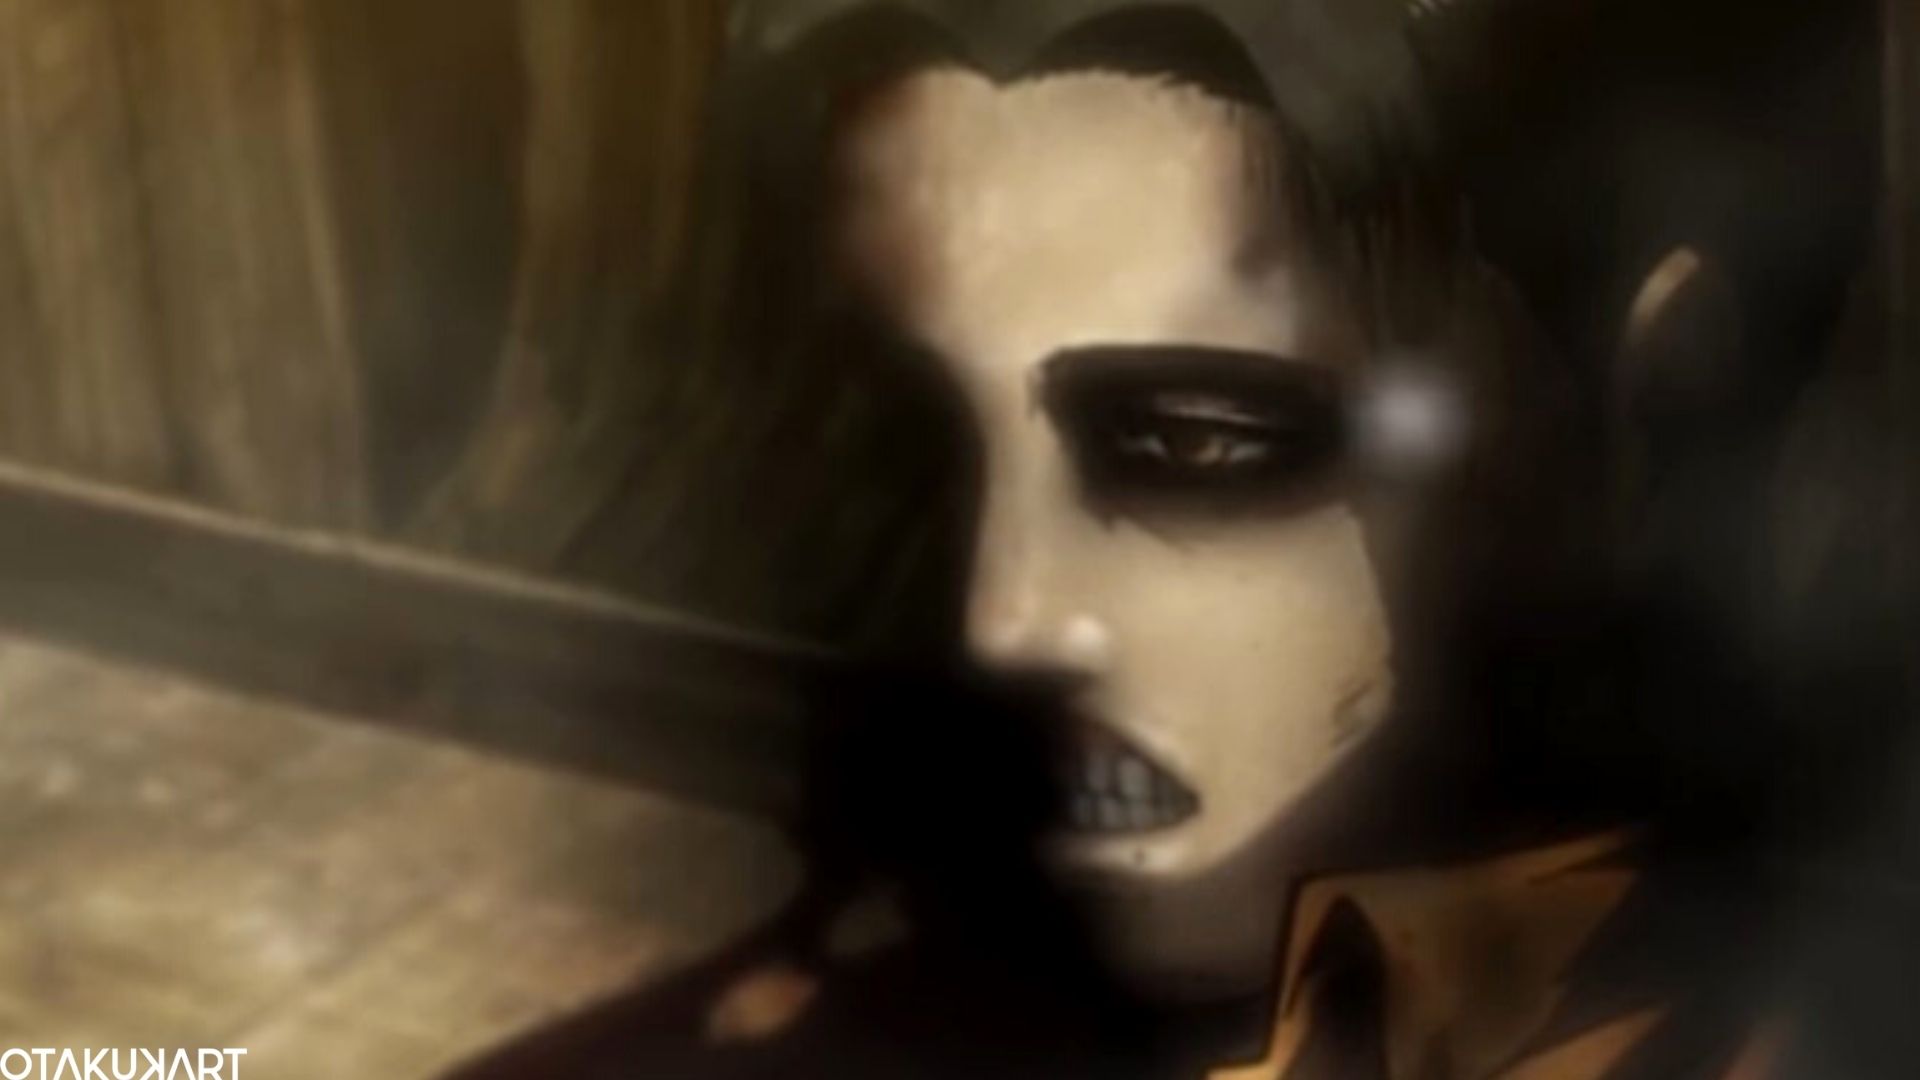 Why Should You Watch AOT? Here Are The Top 10 Reasons To Watch Attack On Titan